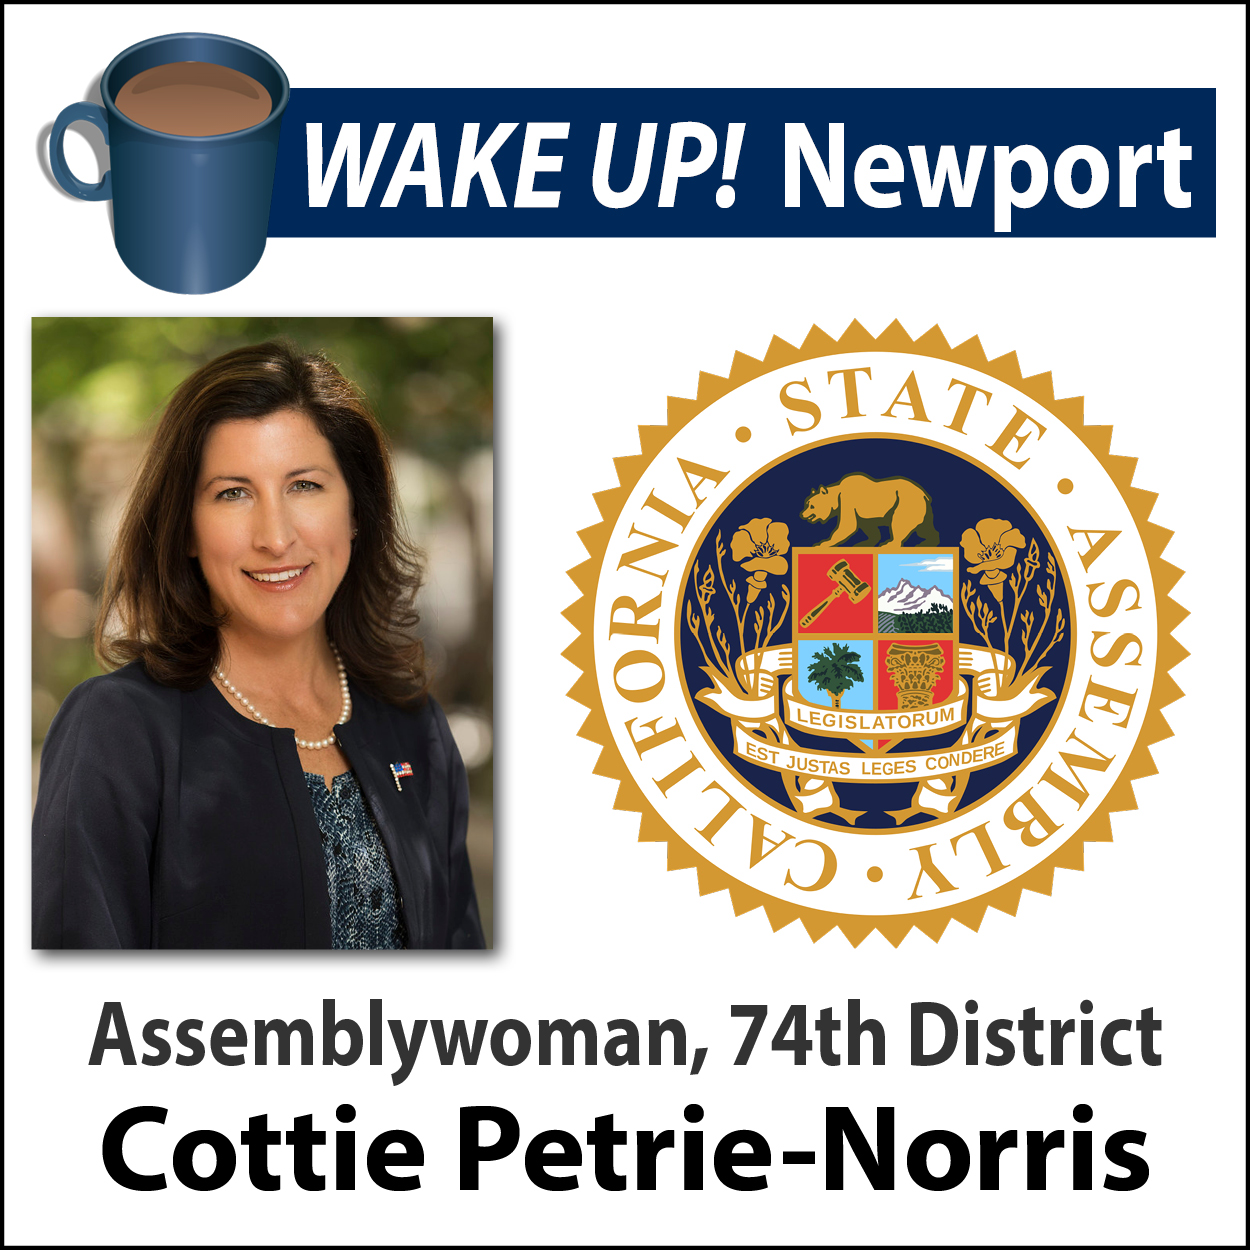 October WAKE UP! Newport - Sacramento Update with Assemblywoman Cottie Petrie-Norris